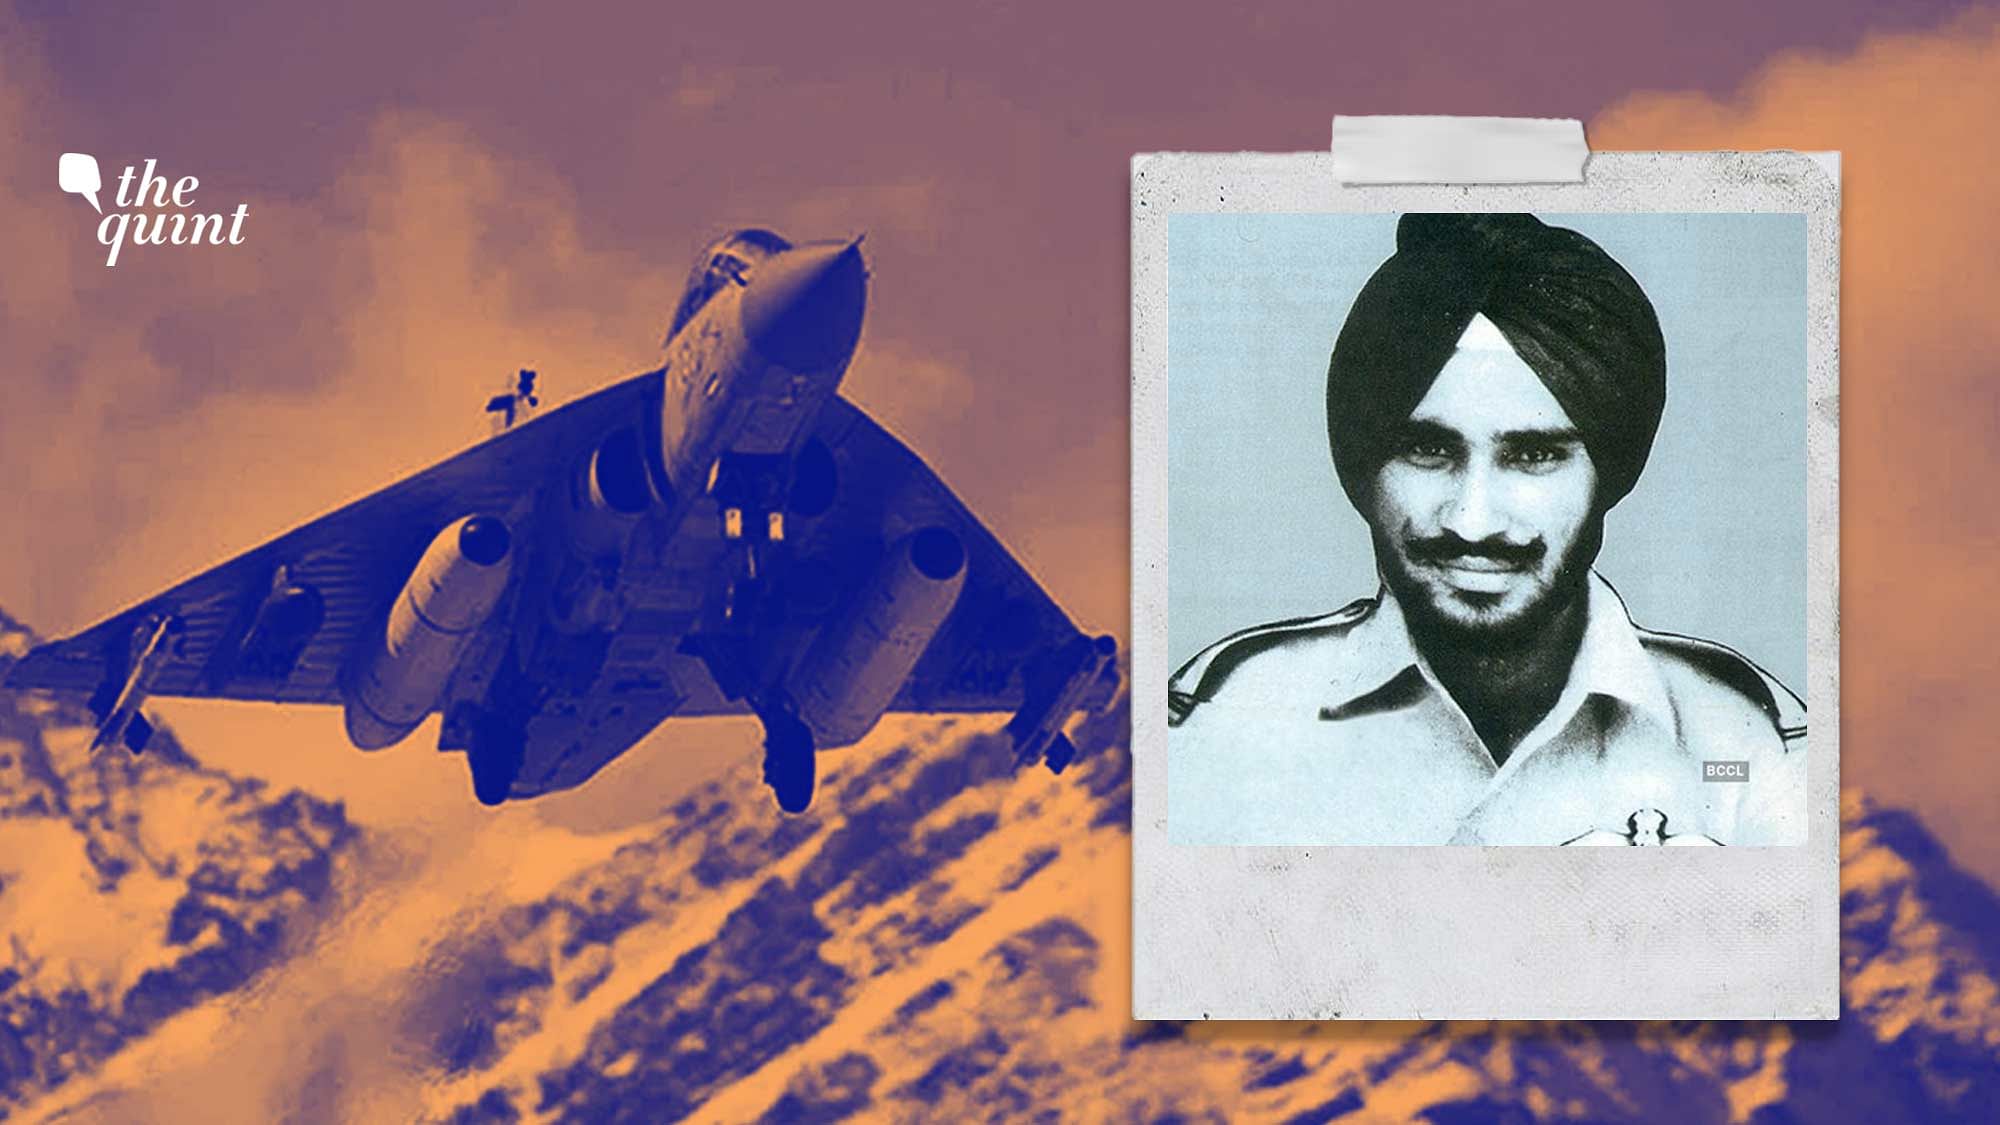 LCA Tejas' 2nd home, 18 Squadron is big in Indian military history. It saw active duties in the 1971 air war with Pakistan, with squadron pilot Flying Officer Nirmal Jit Singh Sekhon, being awarded the IAF’s only Param Vir Chakra thus far.